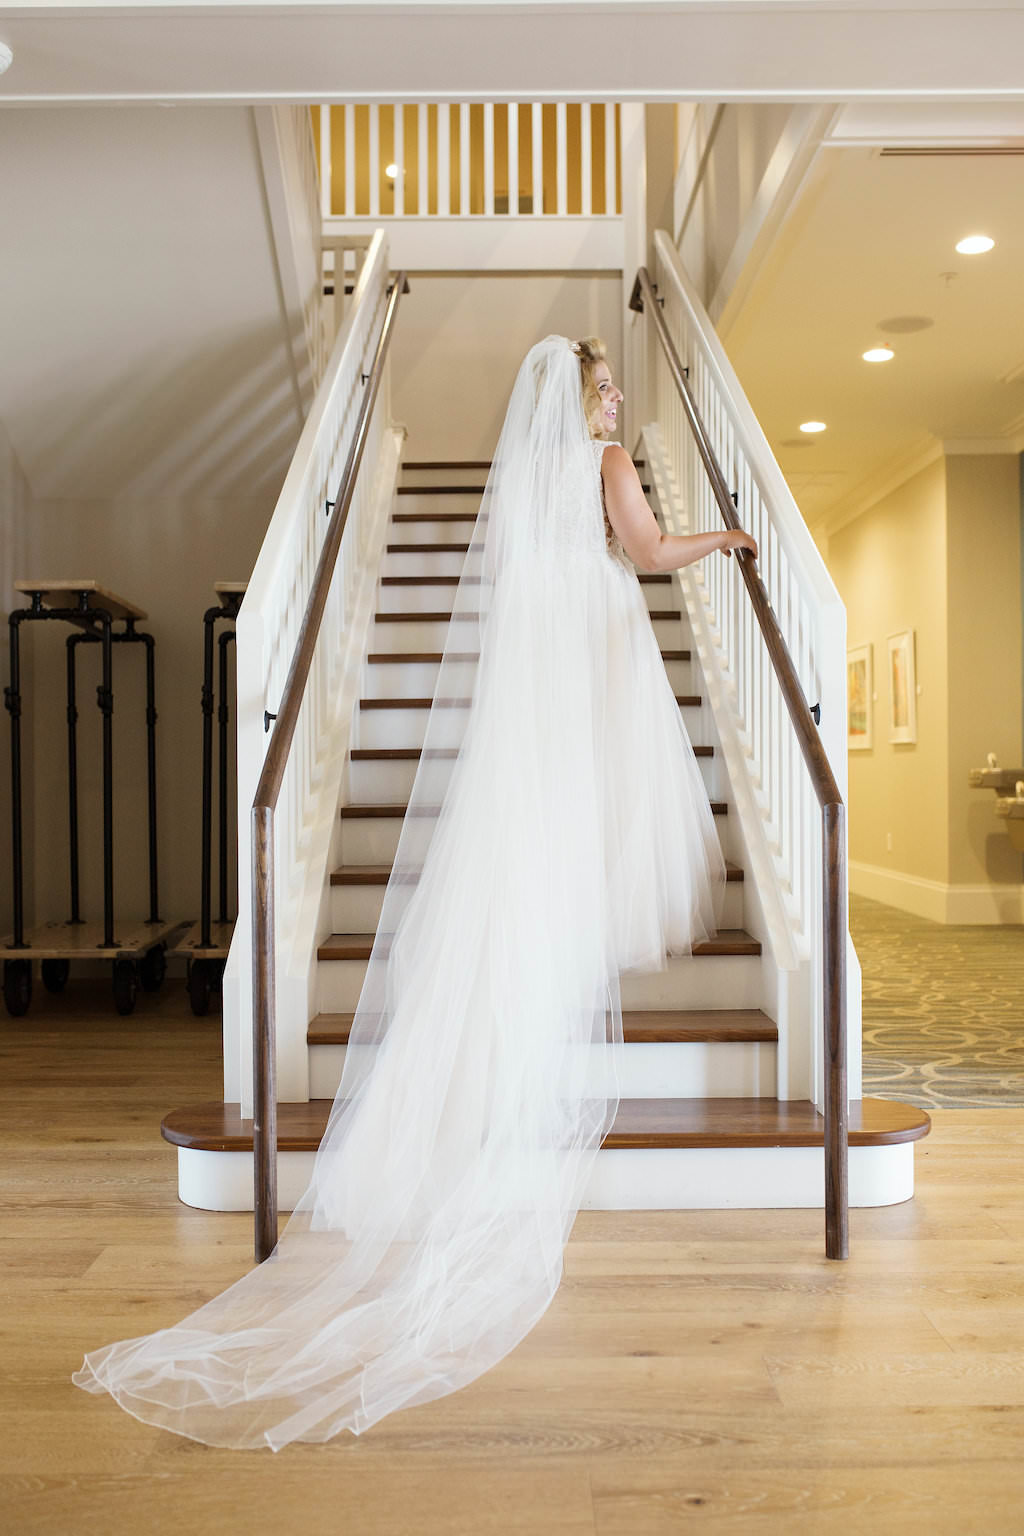 Florida Bride Wedding Portrait on Staircase in Cathedral Length Veil | Tampa Bay Bridal Boutique Truly Forever Bridal